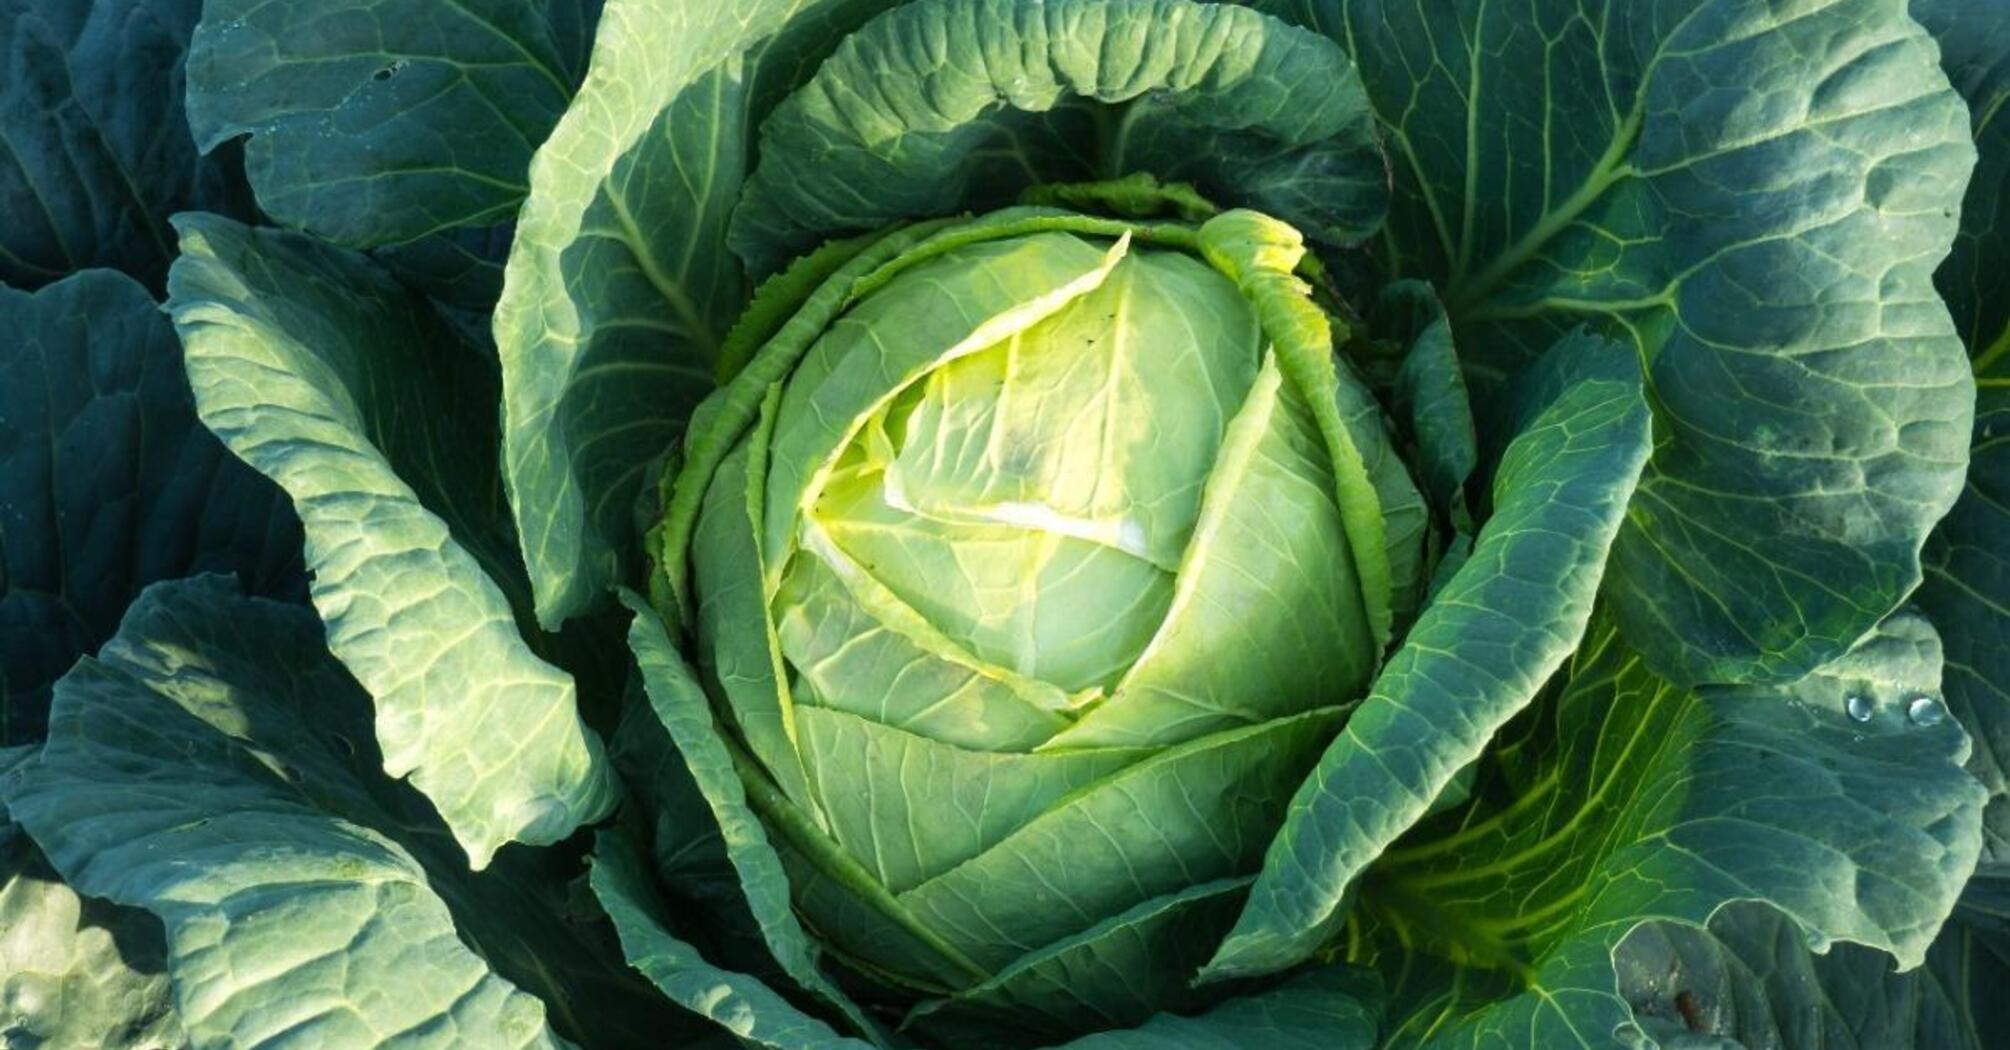 How to harvest a bountiful cabbage crop